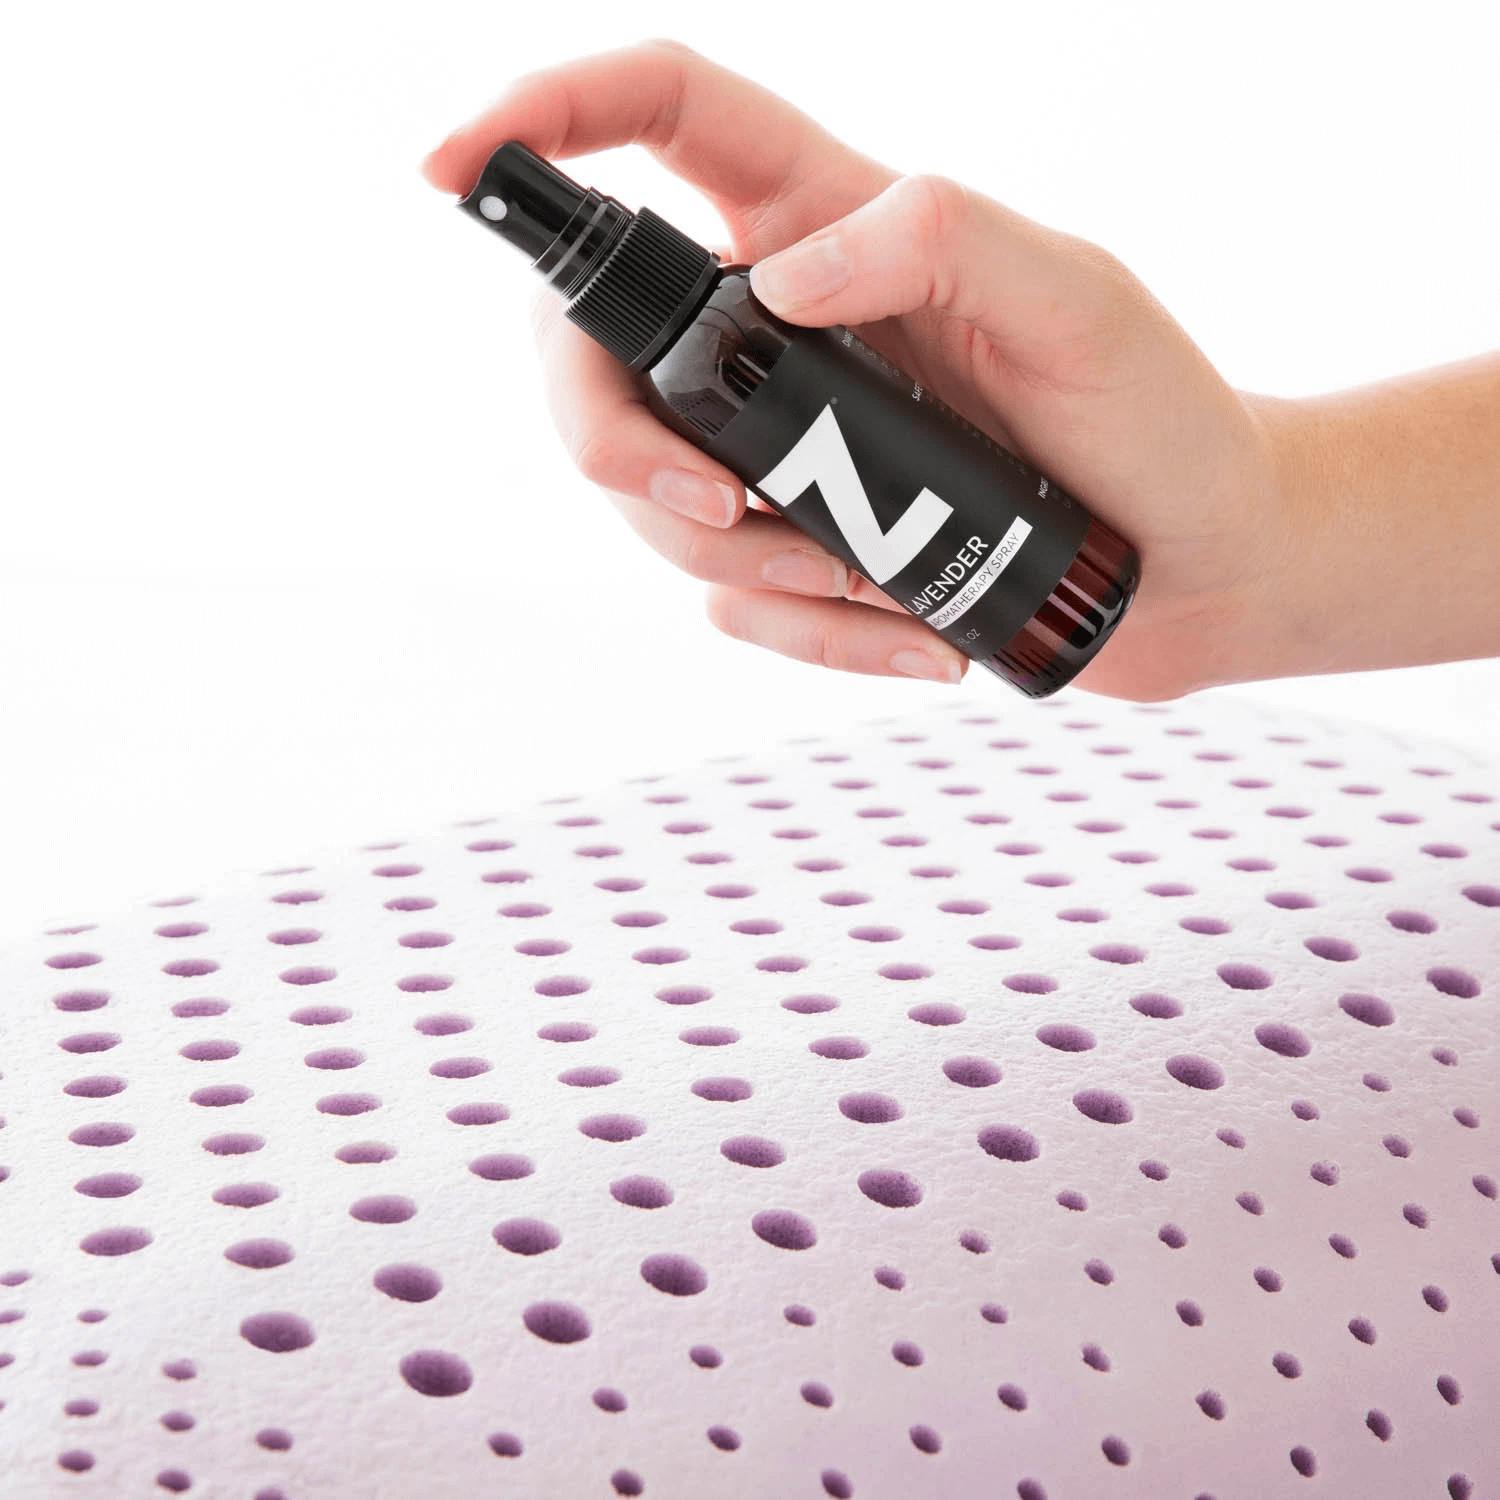 Lavender Sleep Spray being applied to pillow